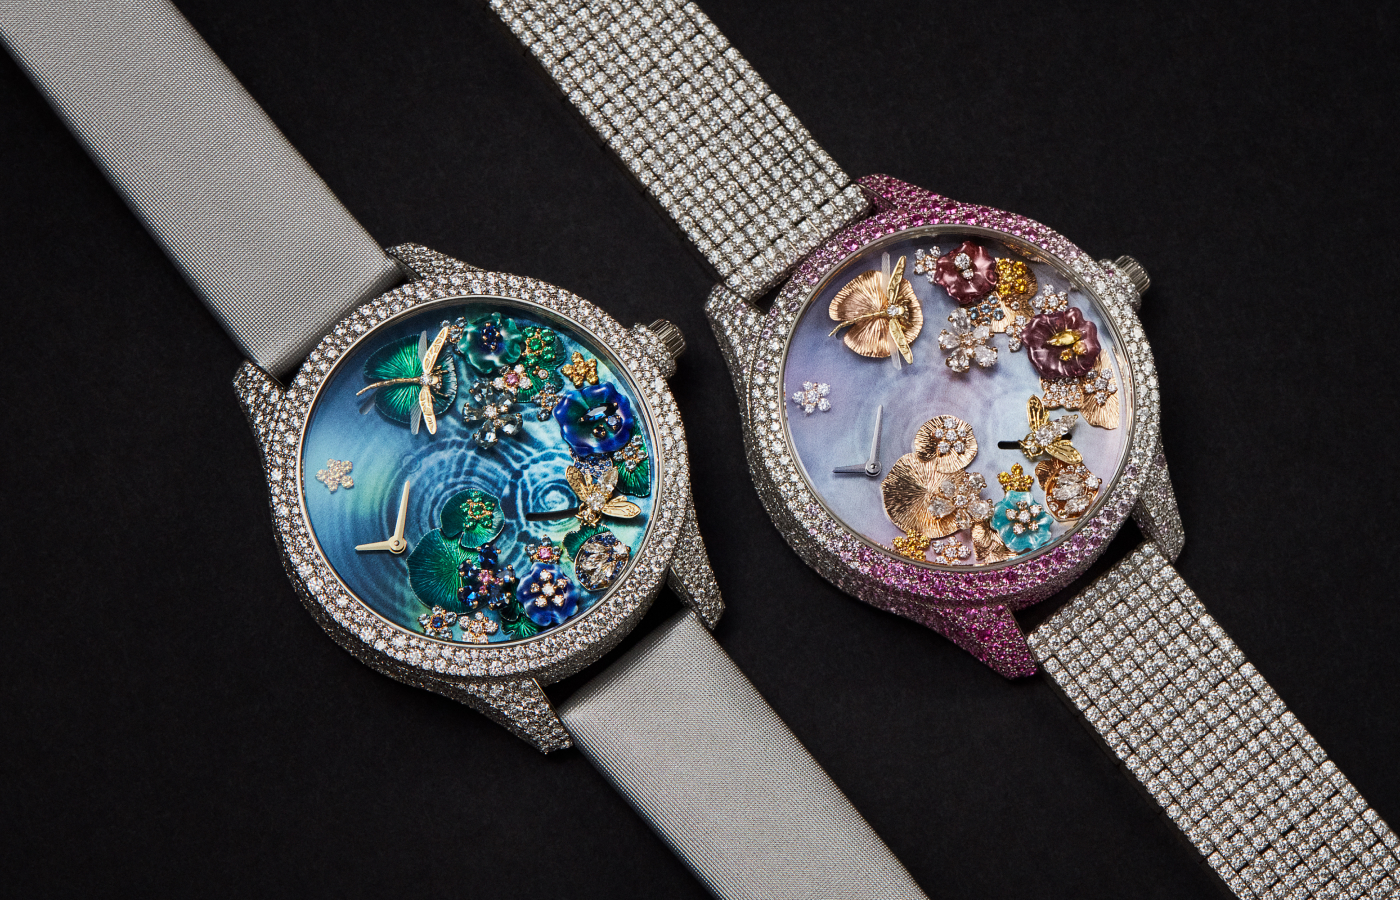 Dior Grand Soir Automate Miroir d’Eau watches in coloured mother- of-pearl, enamel, pink and yellow sapphire, spessartite, Gallus Gallus feather and diamond